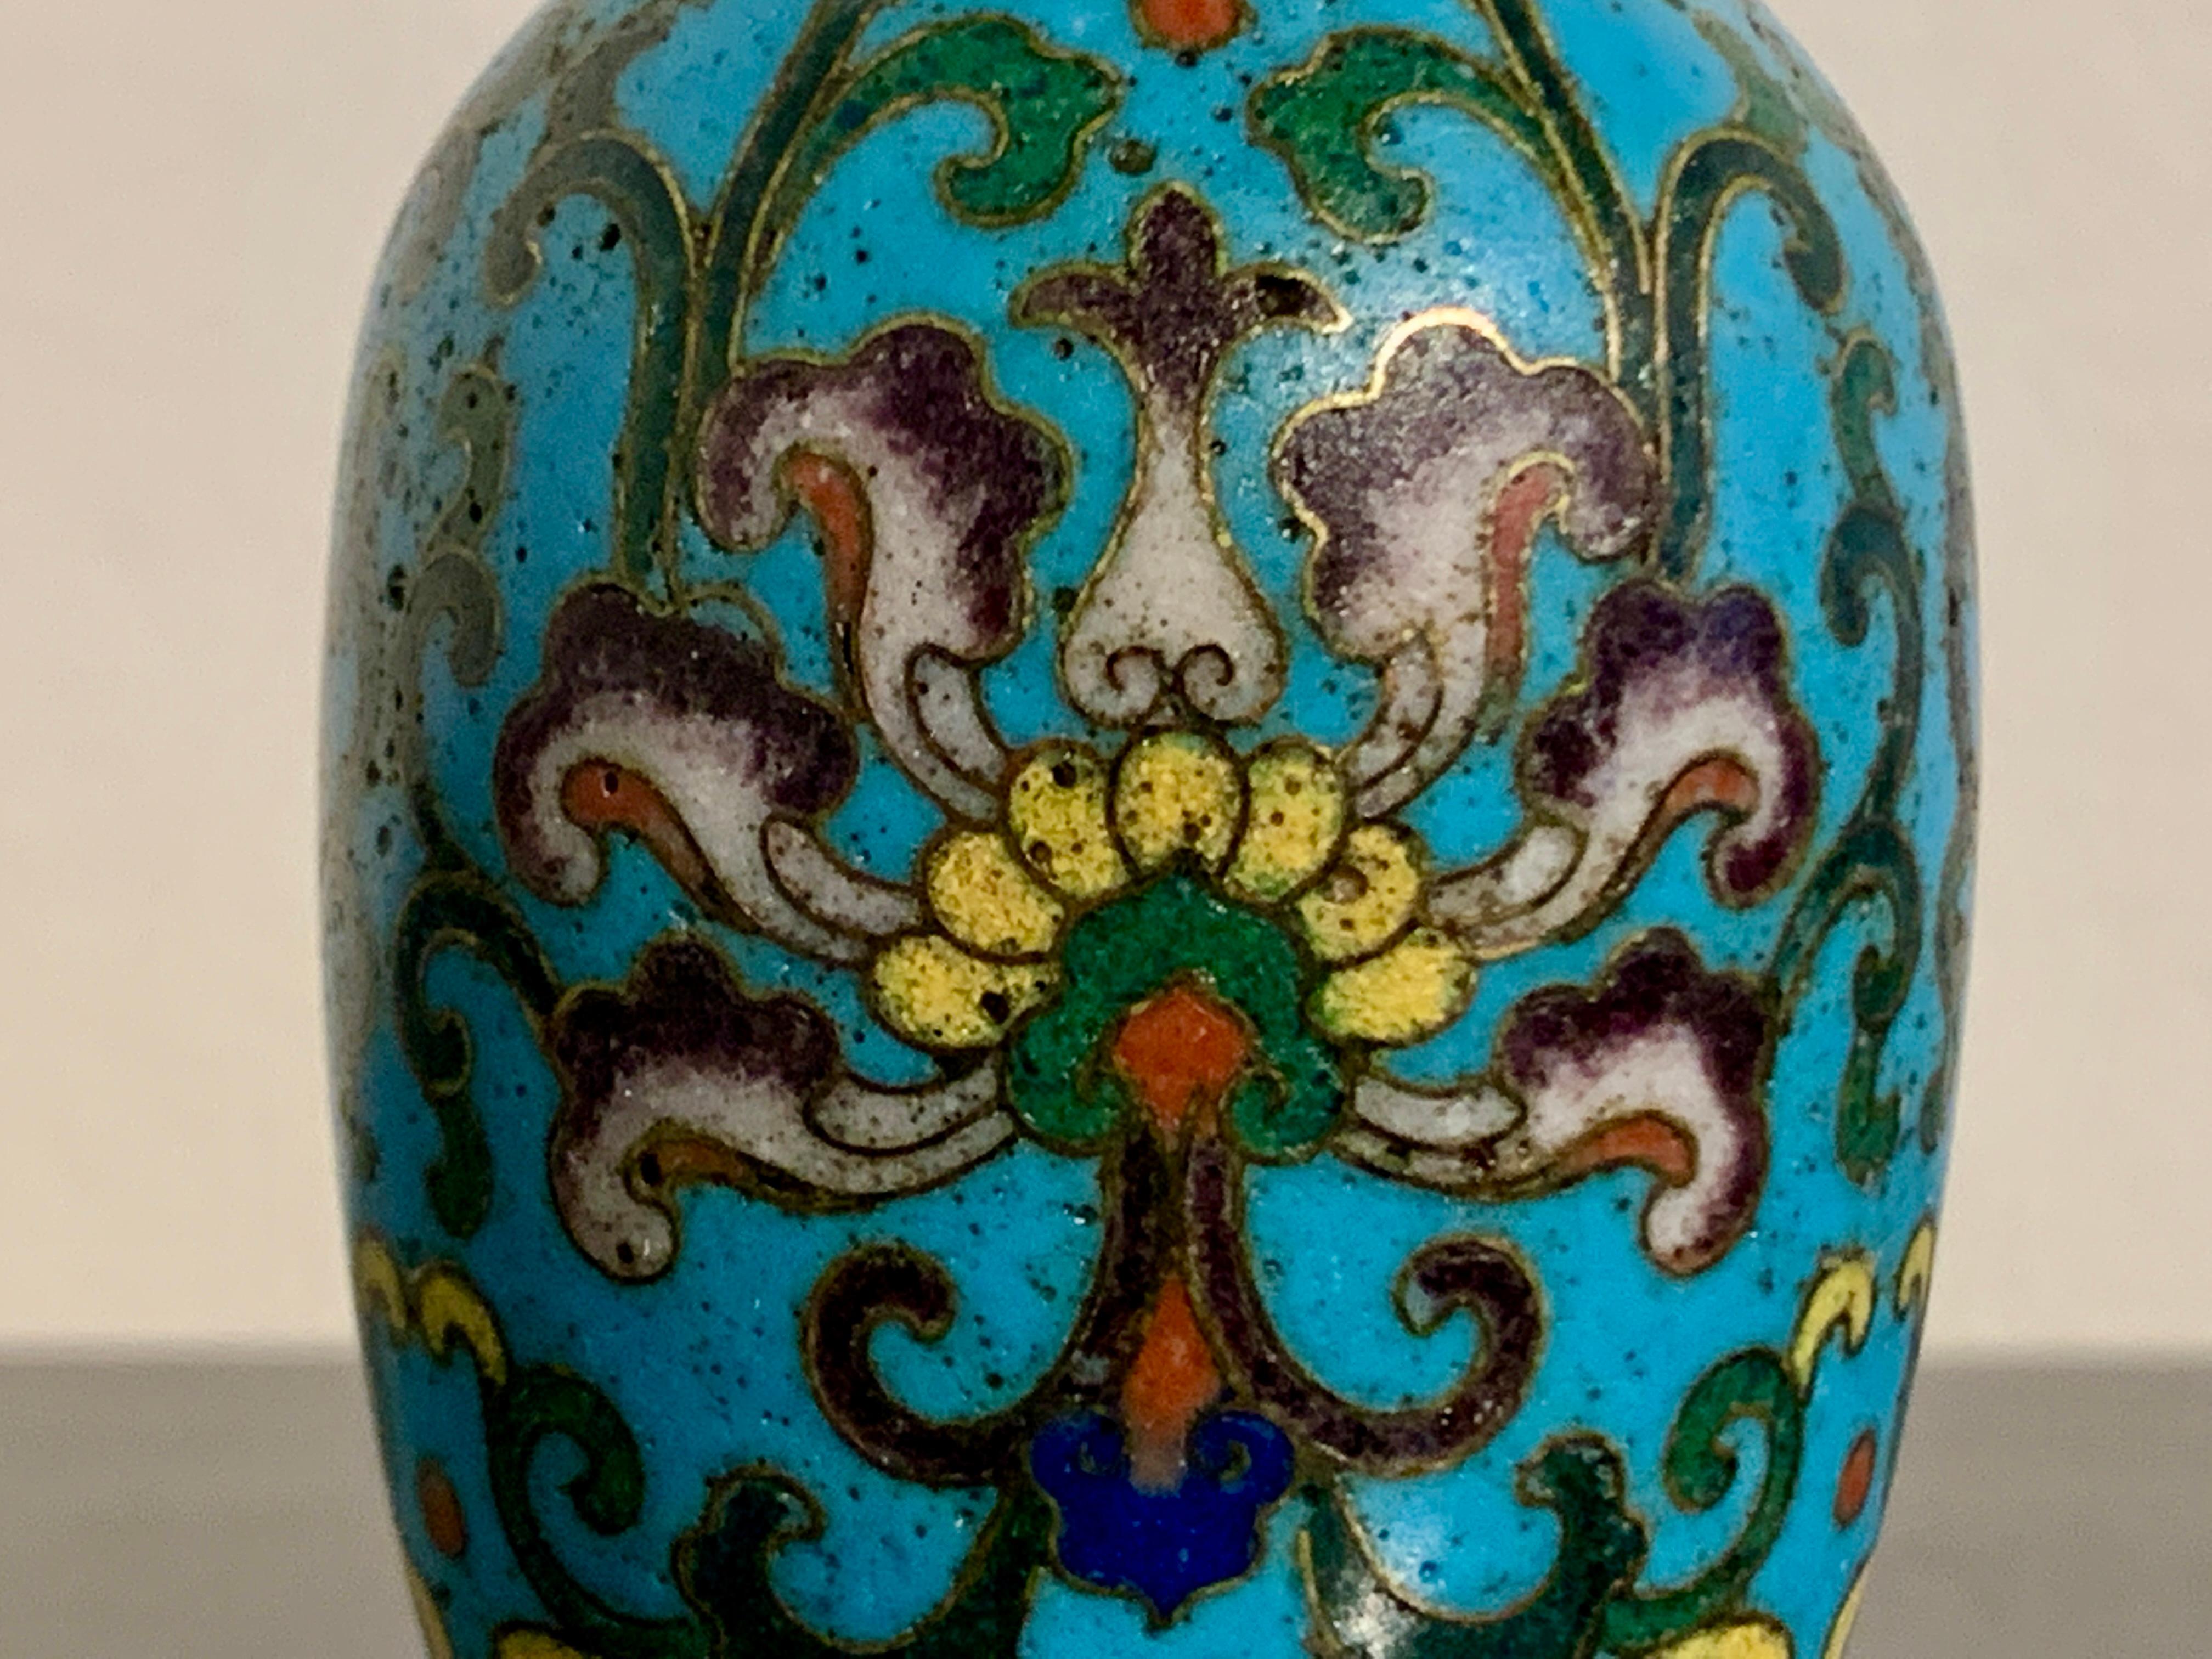 Cloissoné Chinese Cloisonne Incense Tool Vase, Qing Dynasty, 18th/19th Century, China For Sale